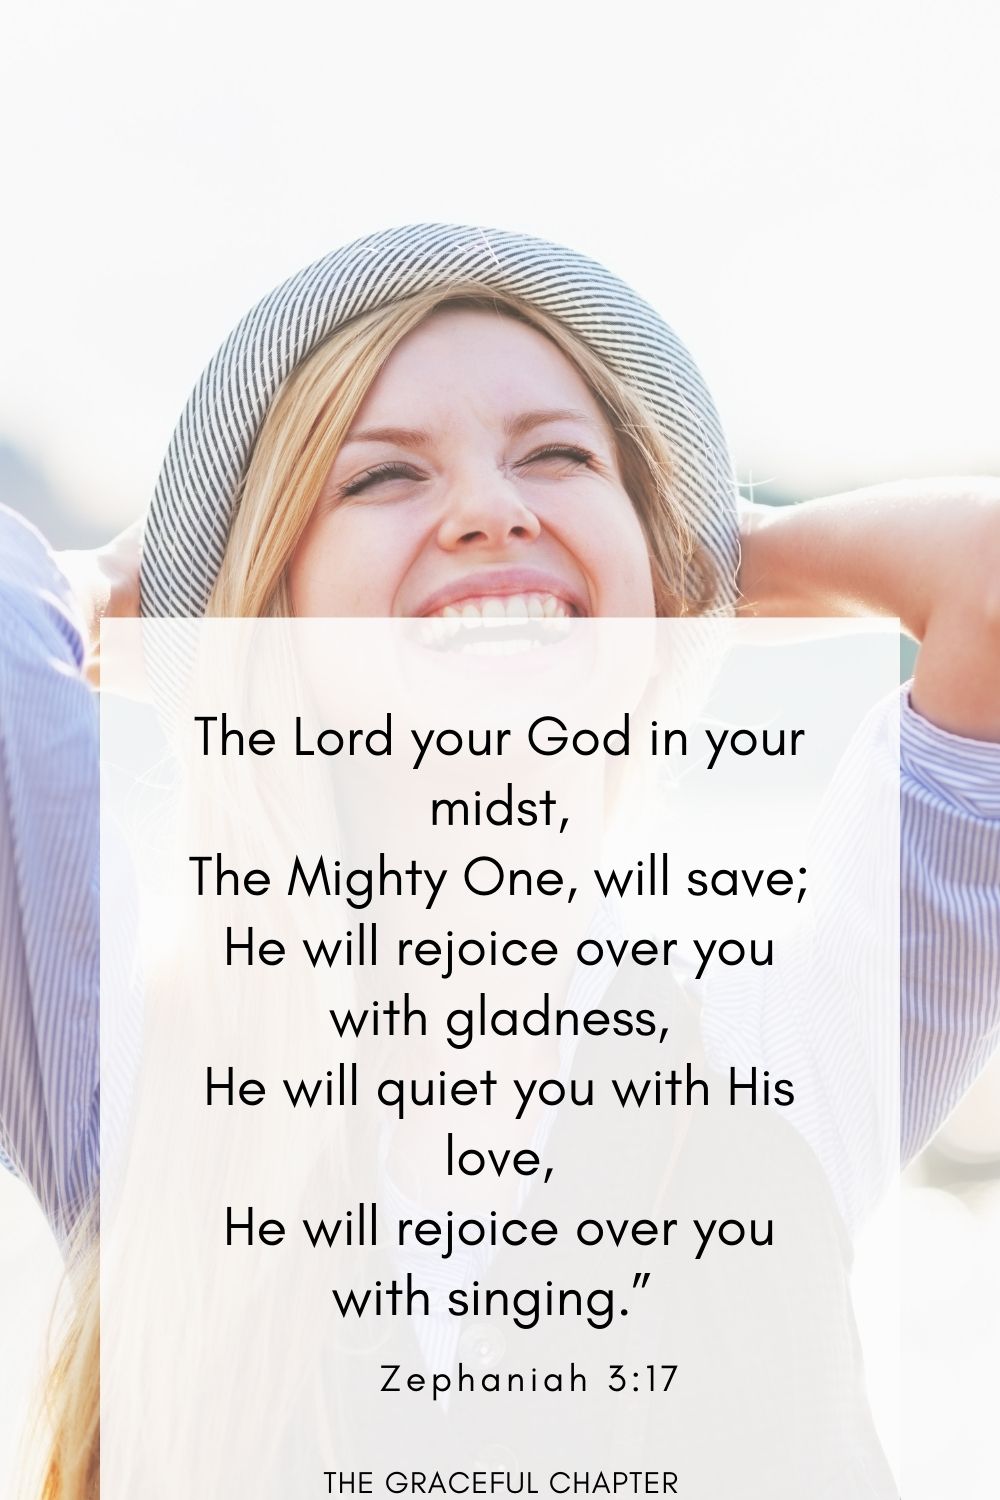 The Lord your God in your midst, The Mighty One, will save; He will rejoice over you with gladness, He will quiet you with His love, He will rejoice over you with singing.” Zephaniah 3:17